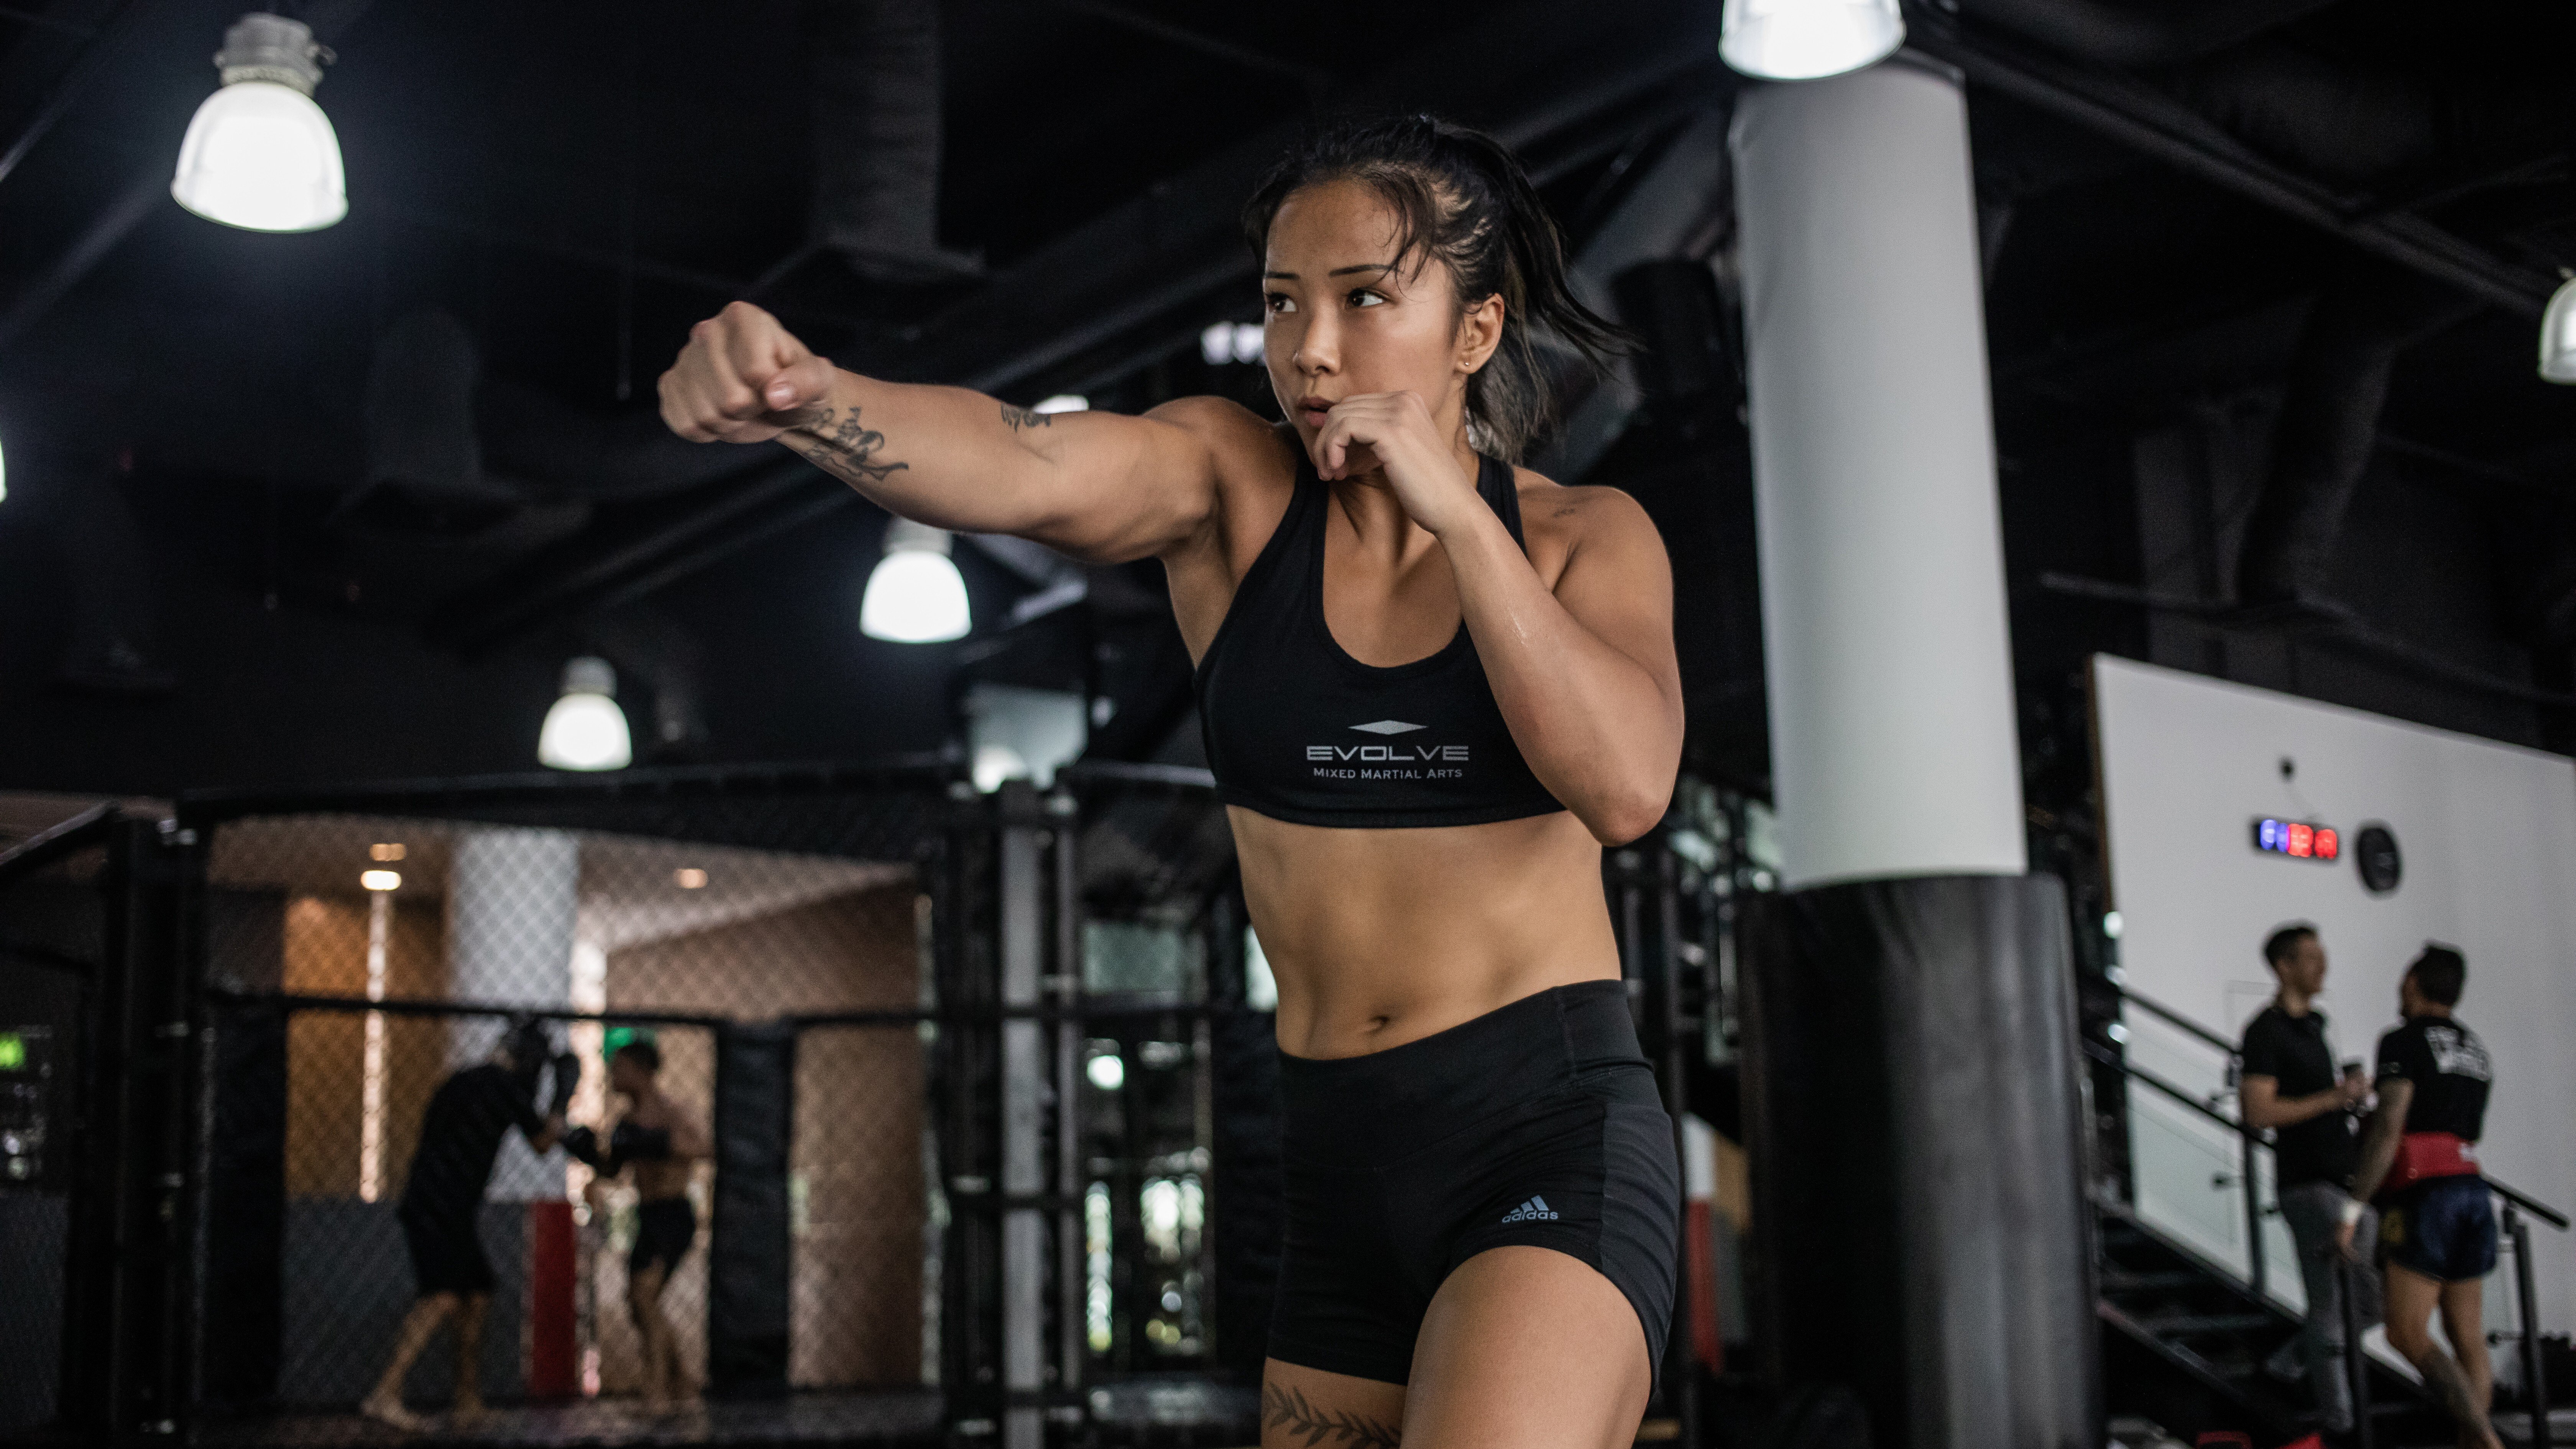 Throughout her career, South Korean MMA fighter Song Ka-yeon has had to battle gender discrimination in and outside the ring. Photo: Evolve MMA